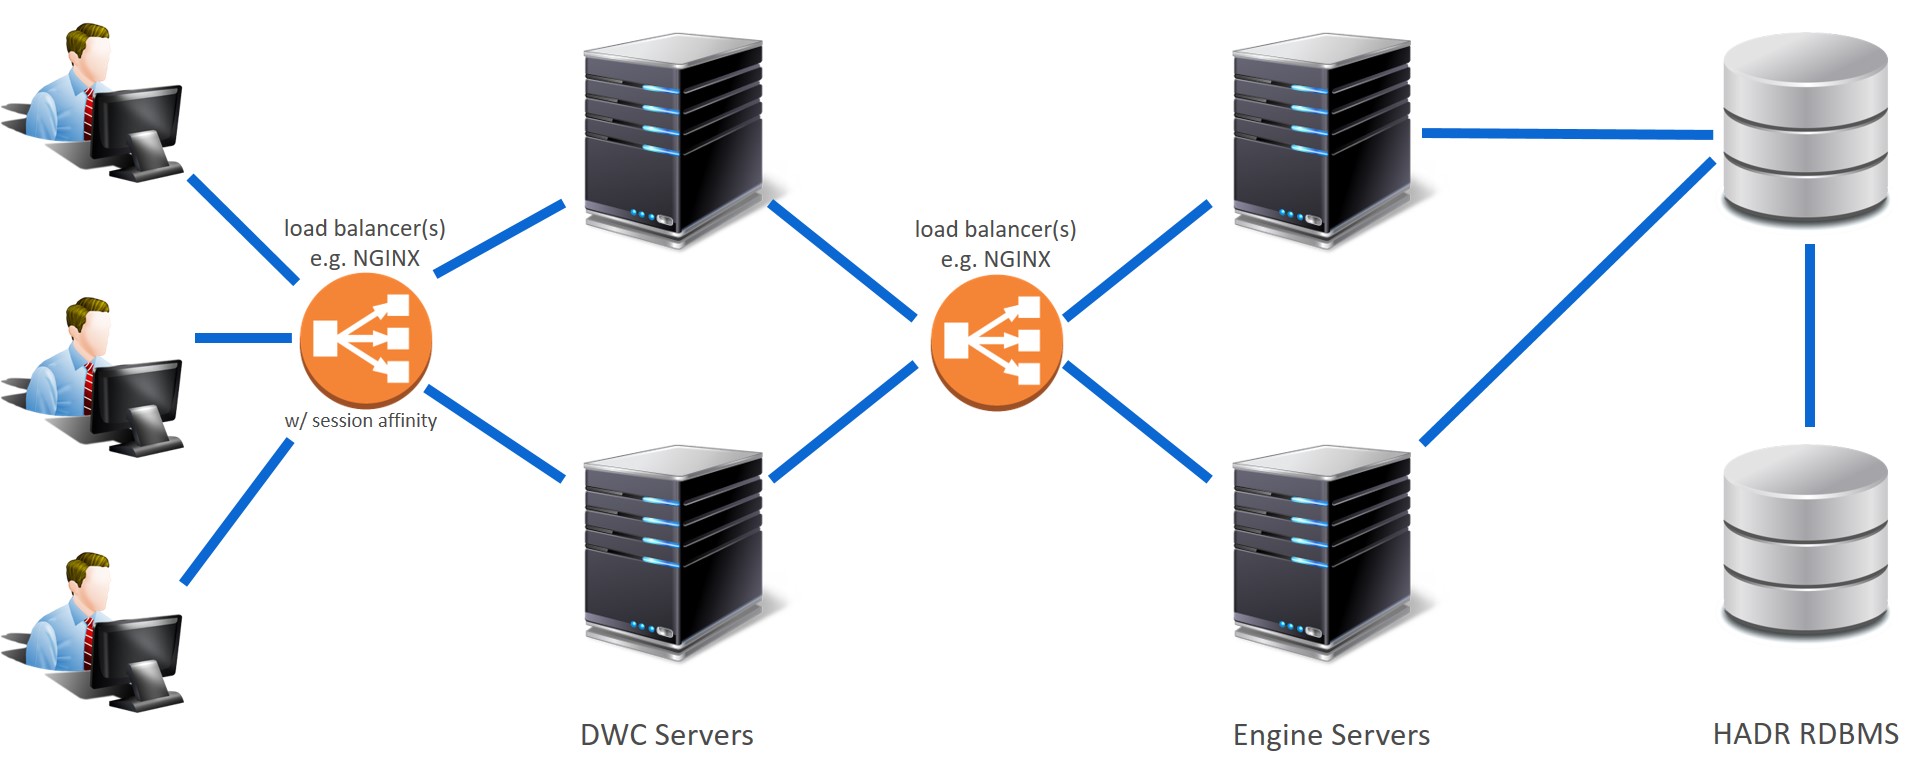 An environment composed of two Dynamic Workload Console servers behind a load balancer with console users connecting directly to the load balancer. A second load balancer is configured between the Dynamic Workload Console servers and the engine modes, master domain manager and backup master domain manager. The engine nodes connect to an HADR RDBMS